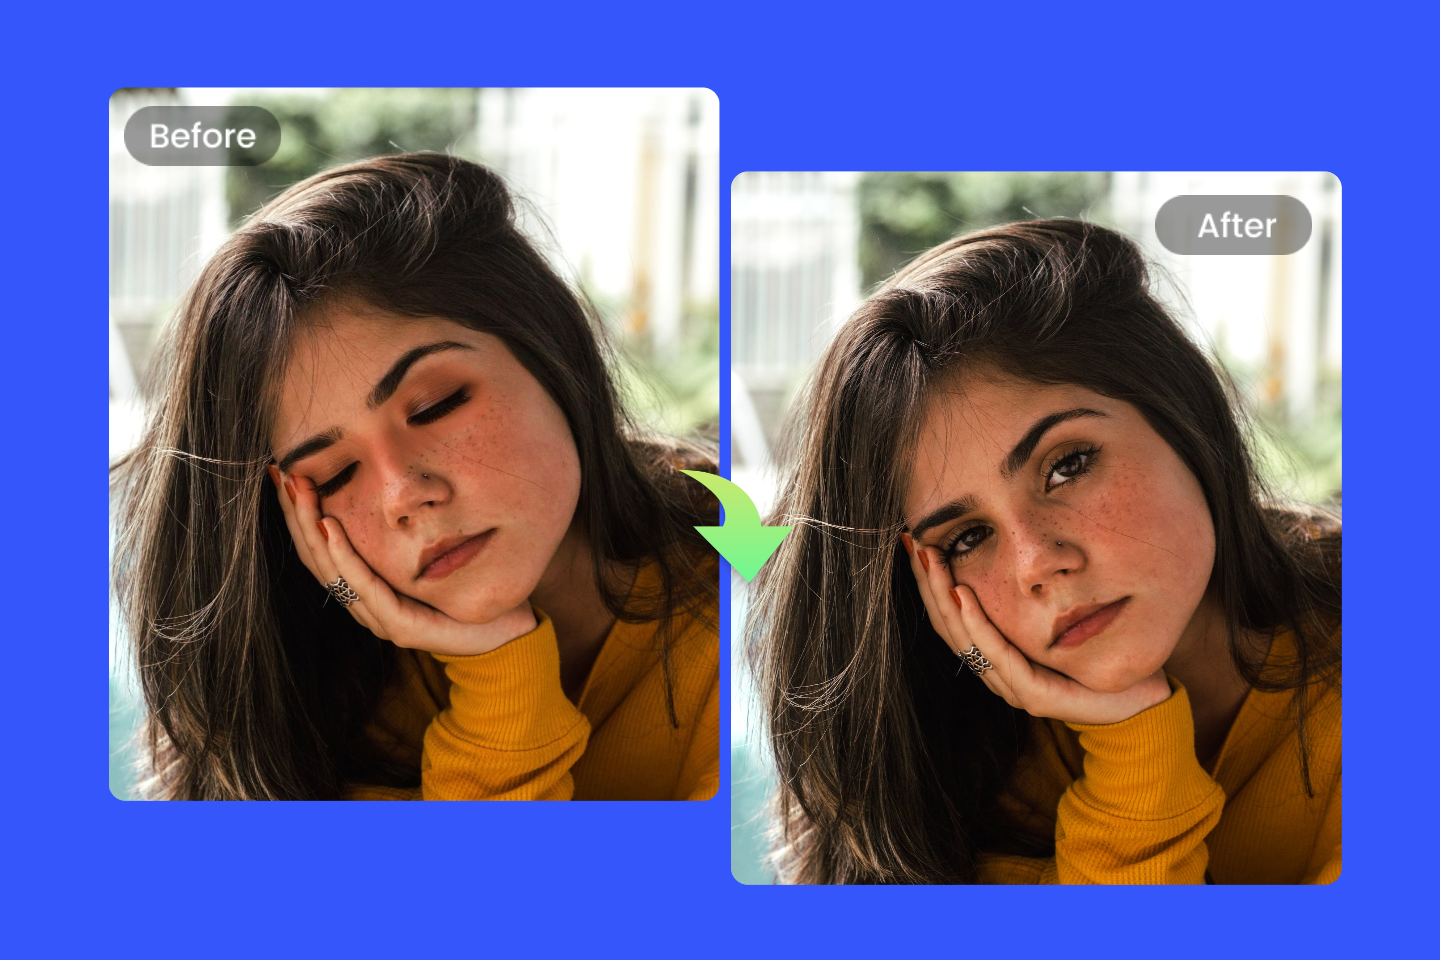 How to Fix Closed Eyes in a Photo?